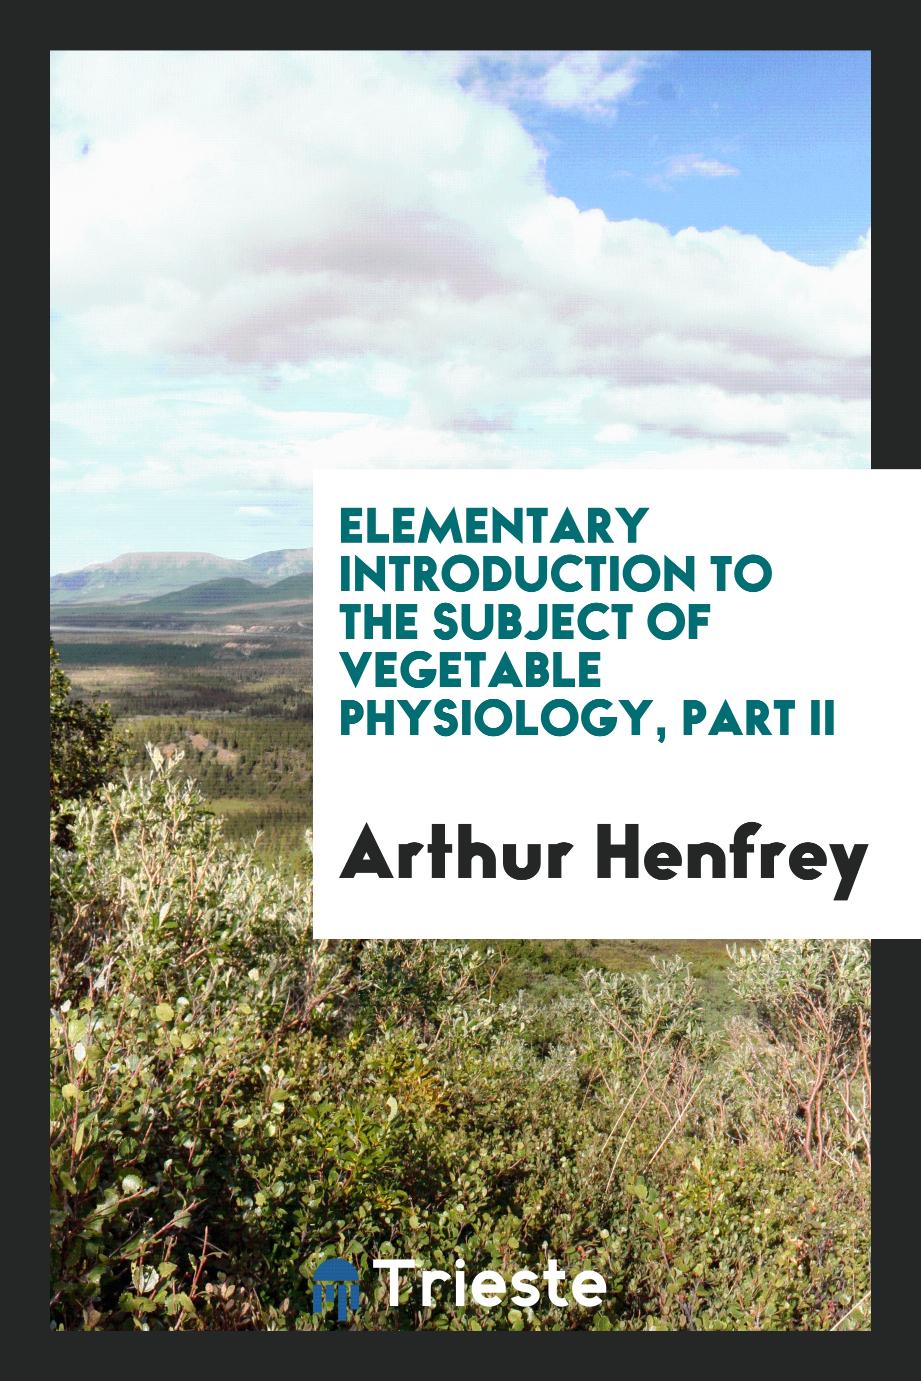 Elementary introduction to the subject of vegetable physiology, Part II